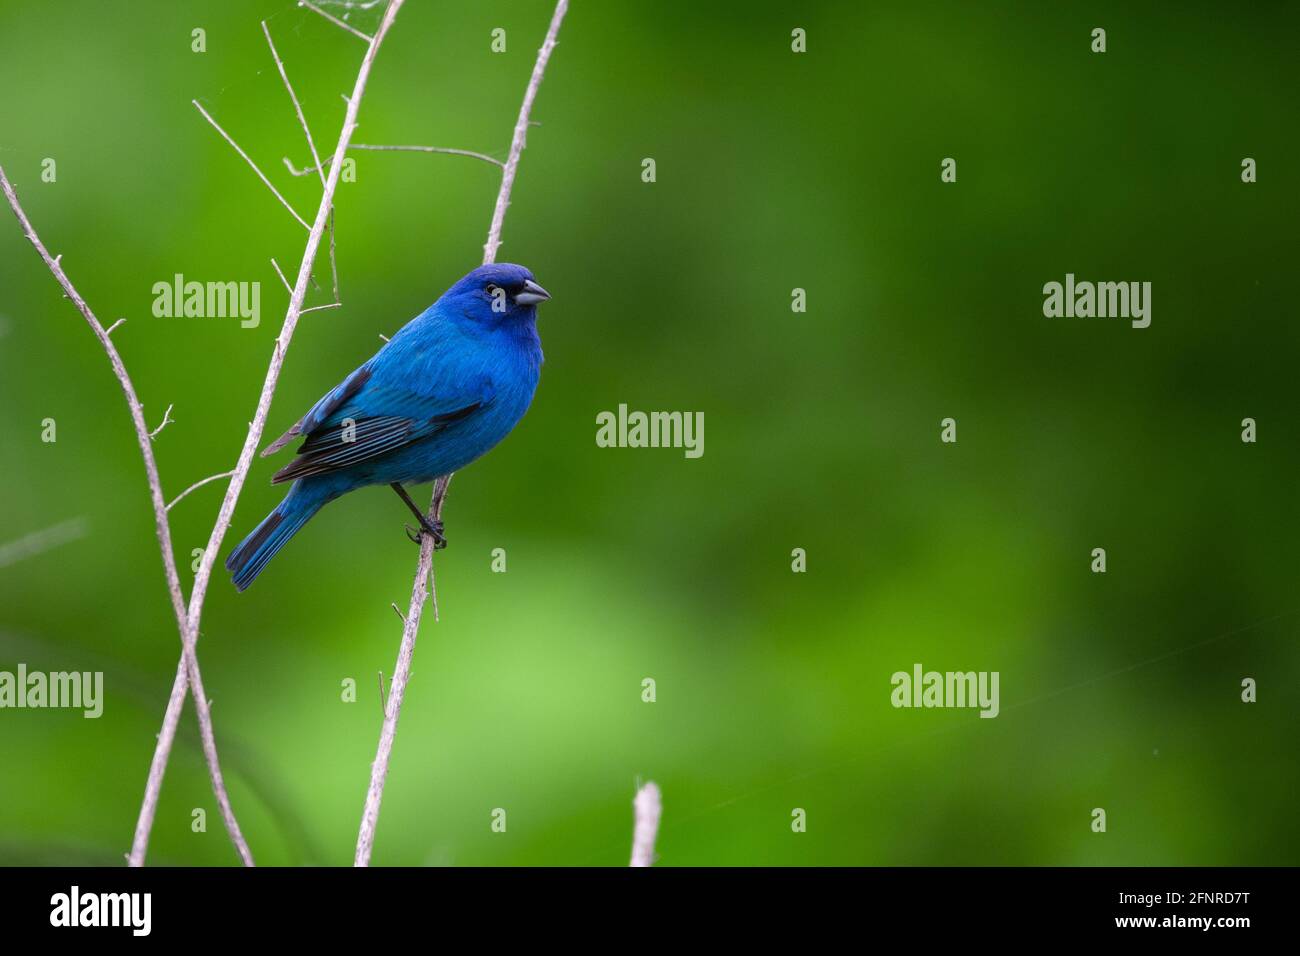 A male indigo bunting looking right across the frame on an overcast spring morning near Brownstown, Indiana. Stock Photo